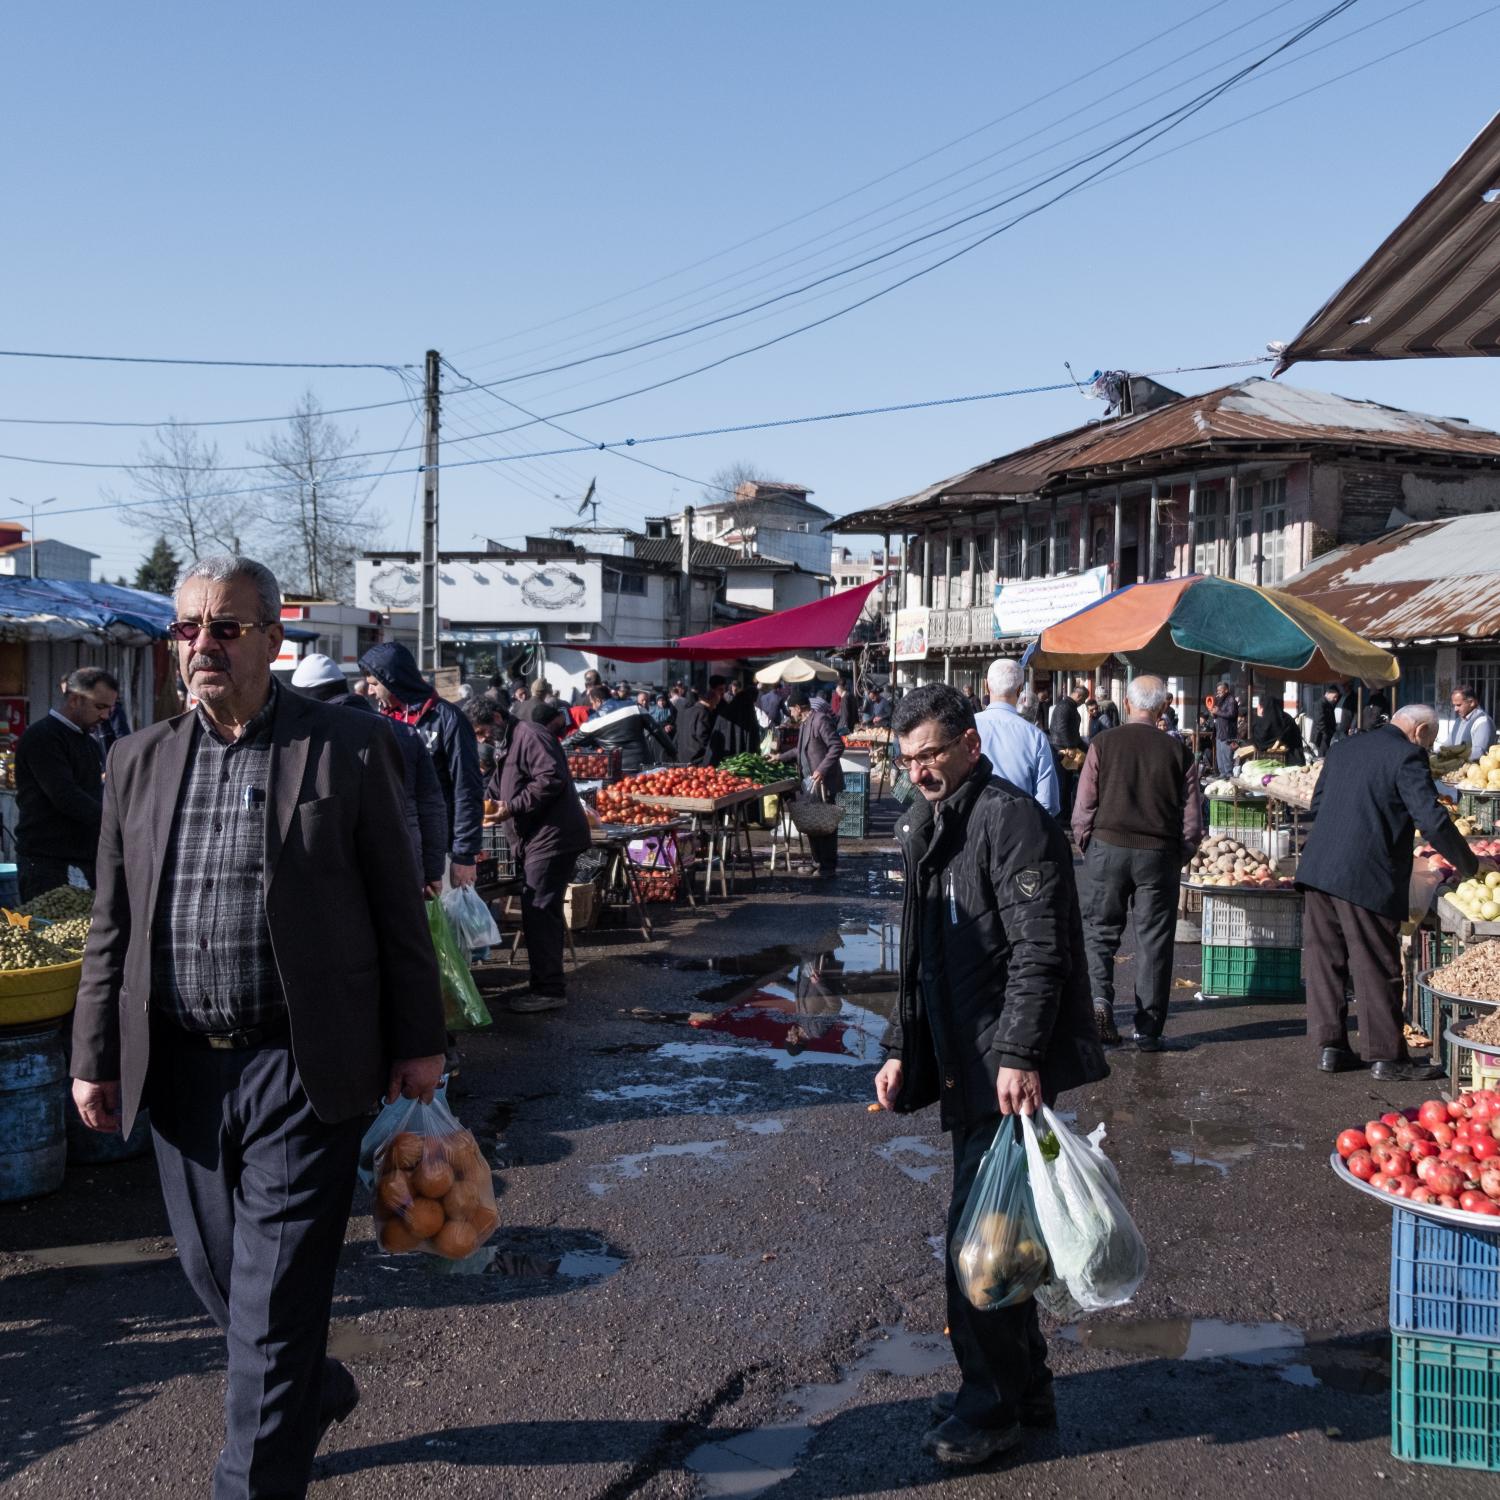  The market land, in everywhere is surrounded by mobile vendors who reach their peak of activity at the market days. 